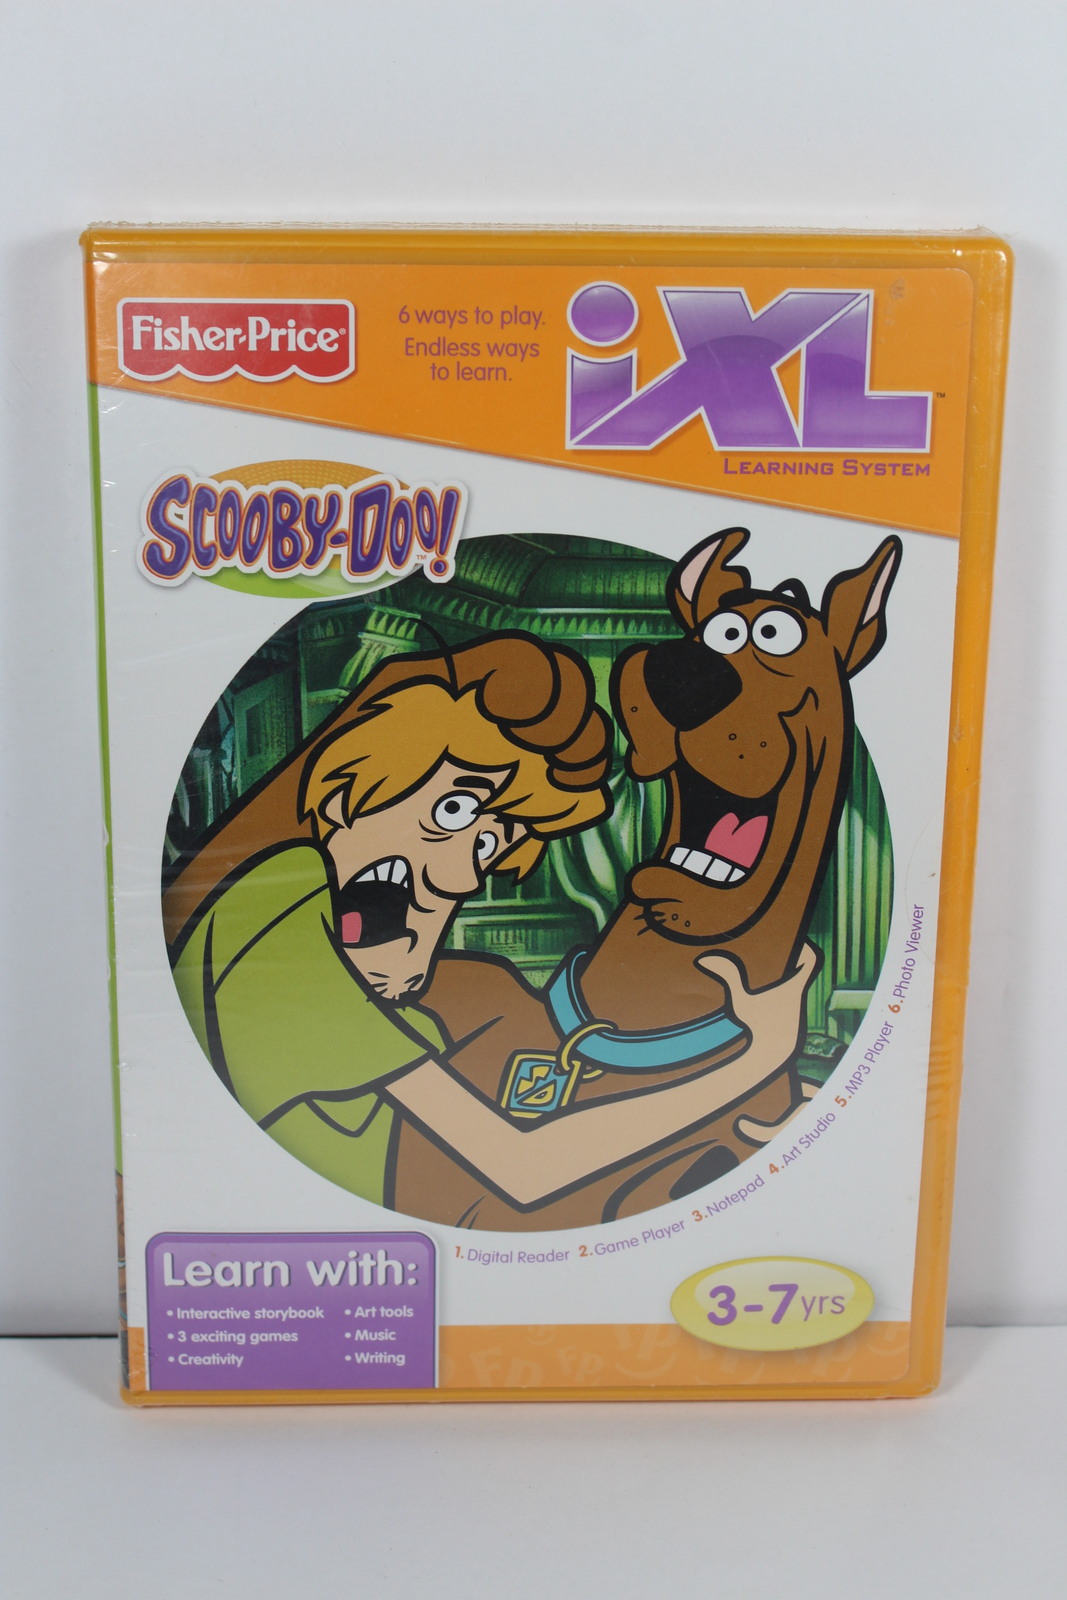 Scooby Doo Fisher Price iXL Learning System Software Educational Game 3-7 years - $10.00